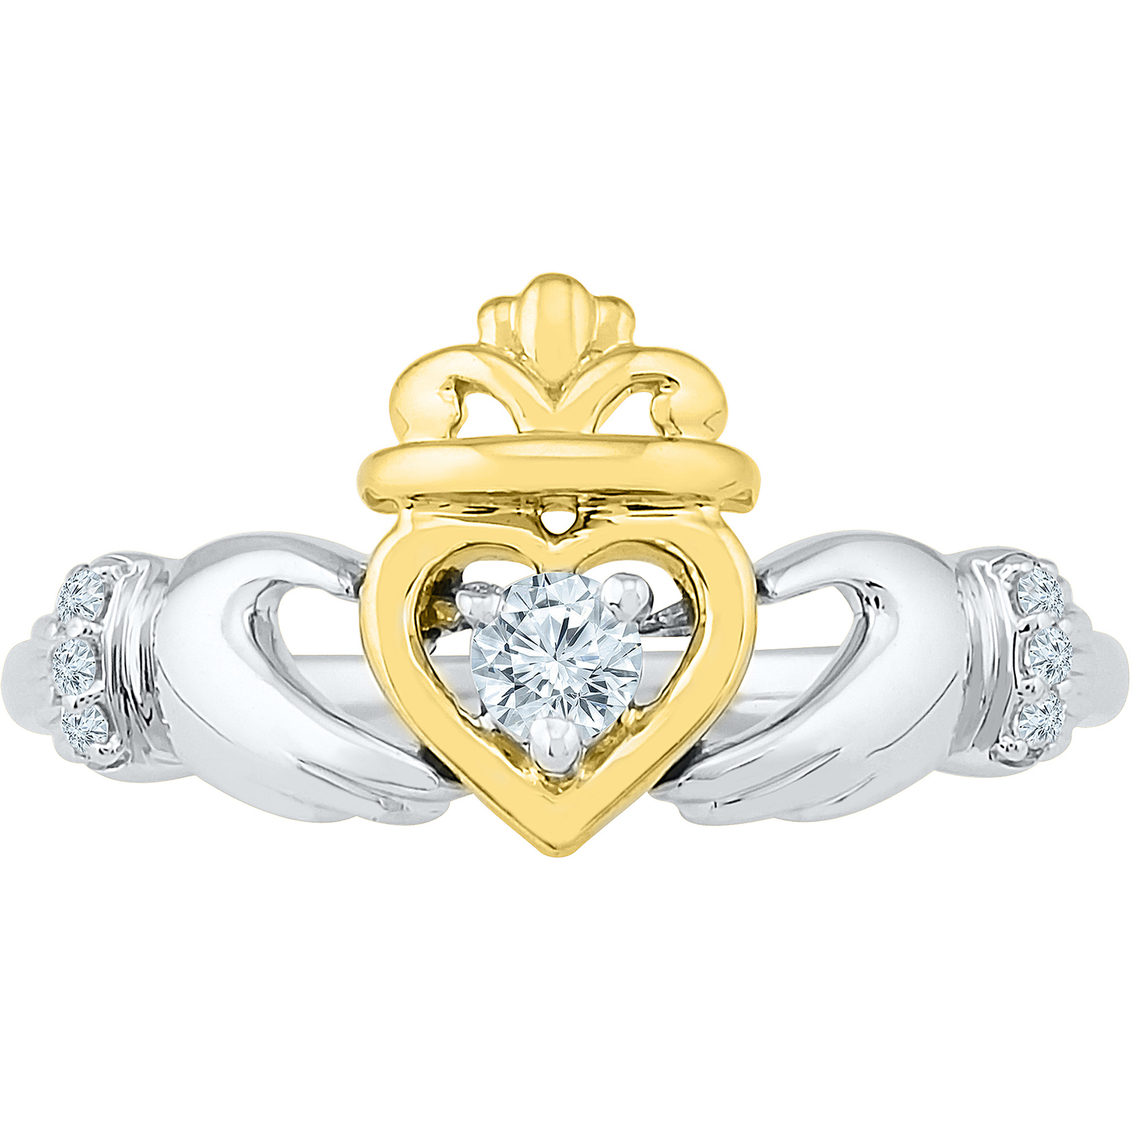 10K Yellow Gold and Sterling Silver 1/8 CTW Diamond Fashion Ring - Image 2 of 2